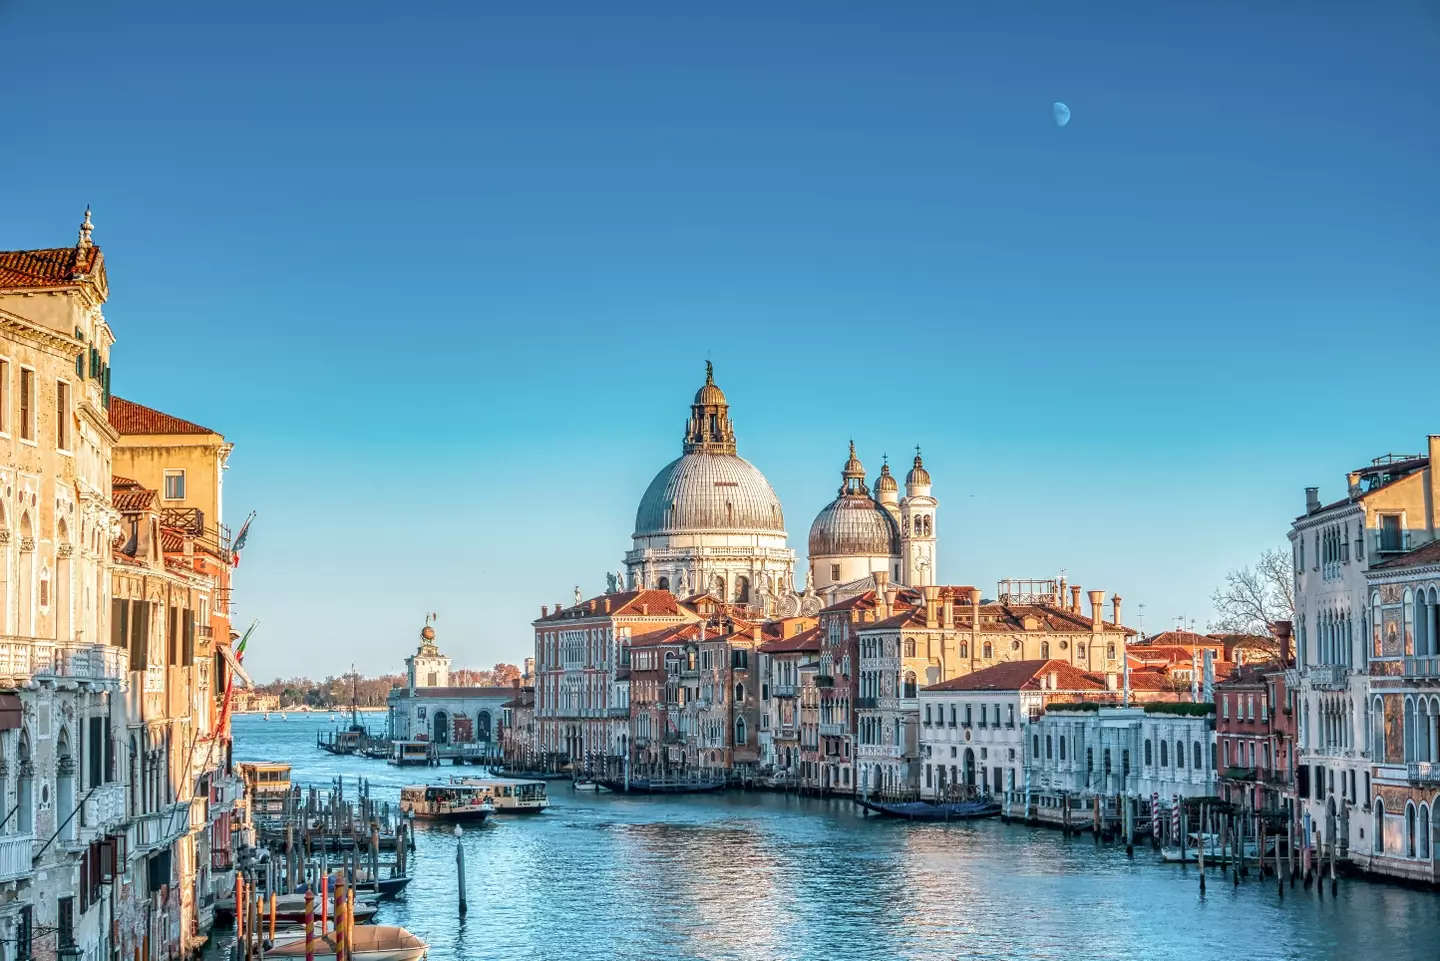 Millions of tourists flock to Venice each year, although perhaps there's a few too many.